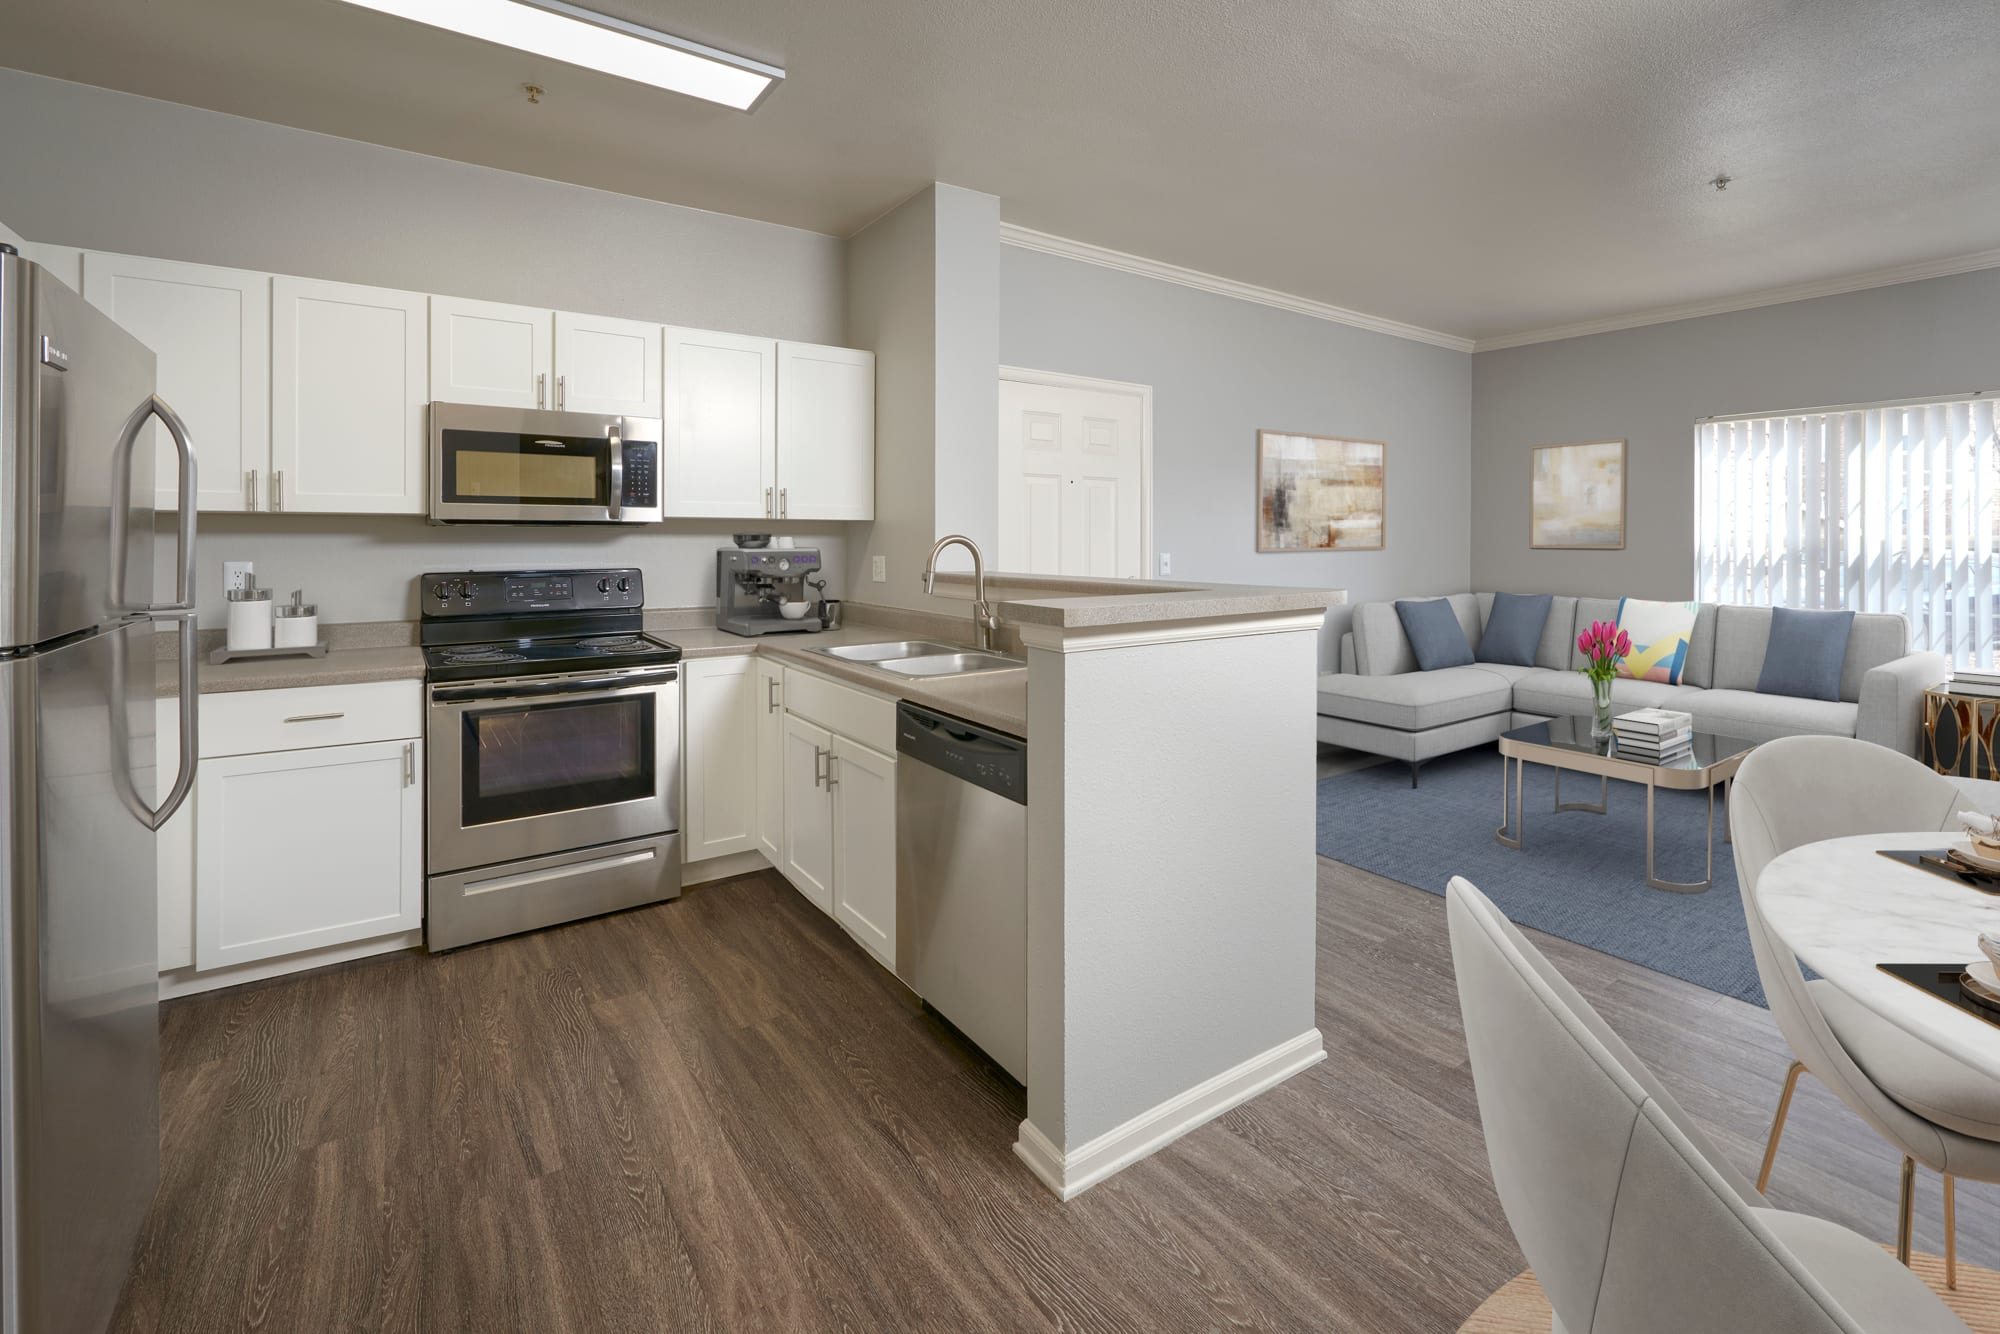 Newly renovated home with white kitchen cabinetry and stainless steel appliances at Westridge Apartments in Aurora, Colorado